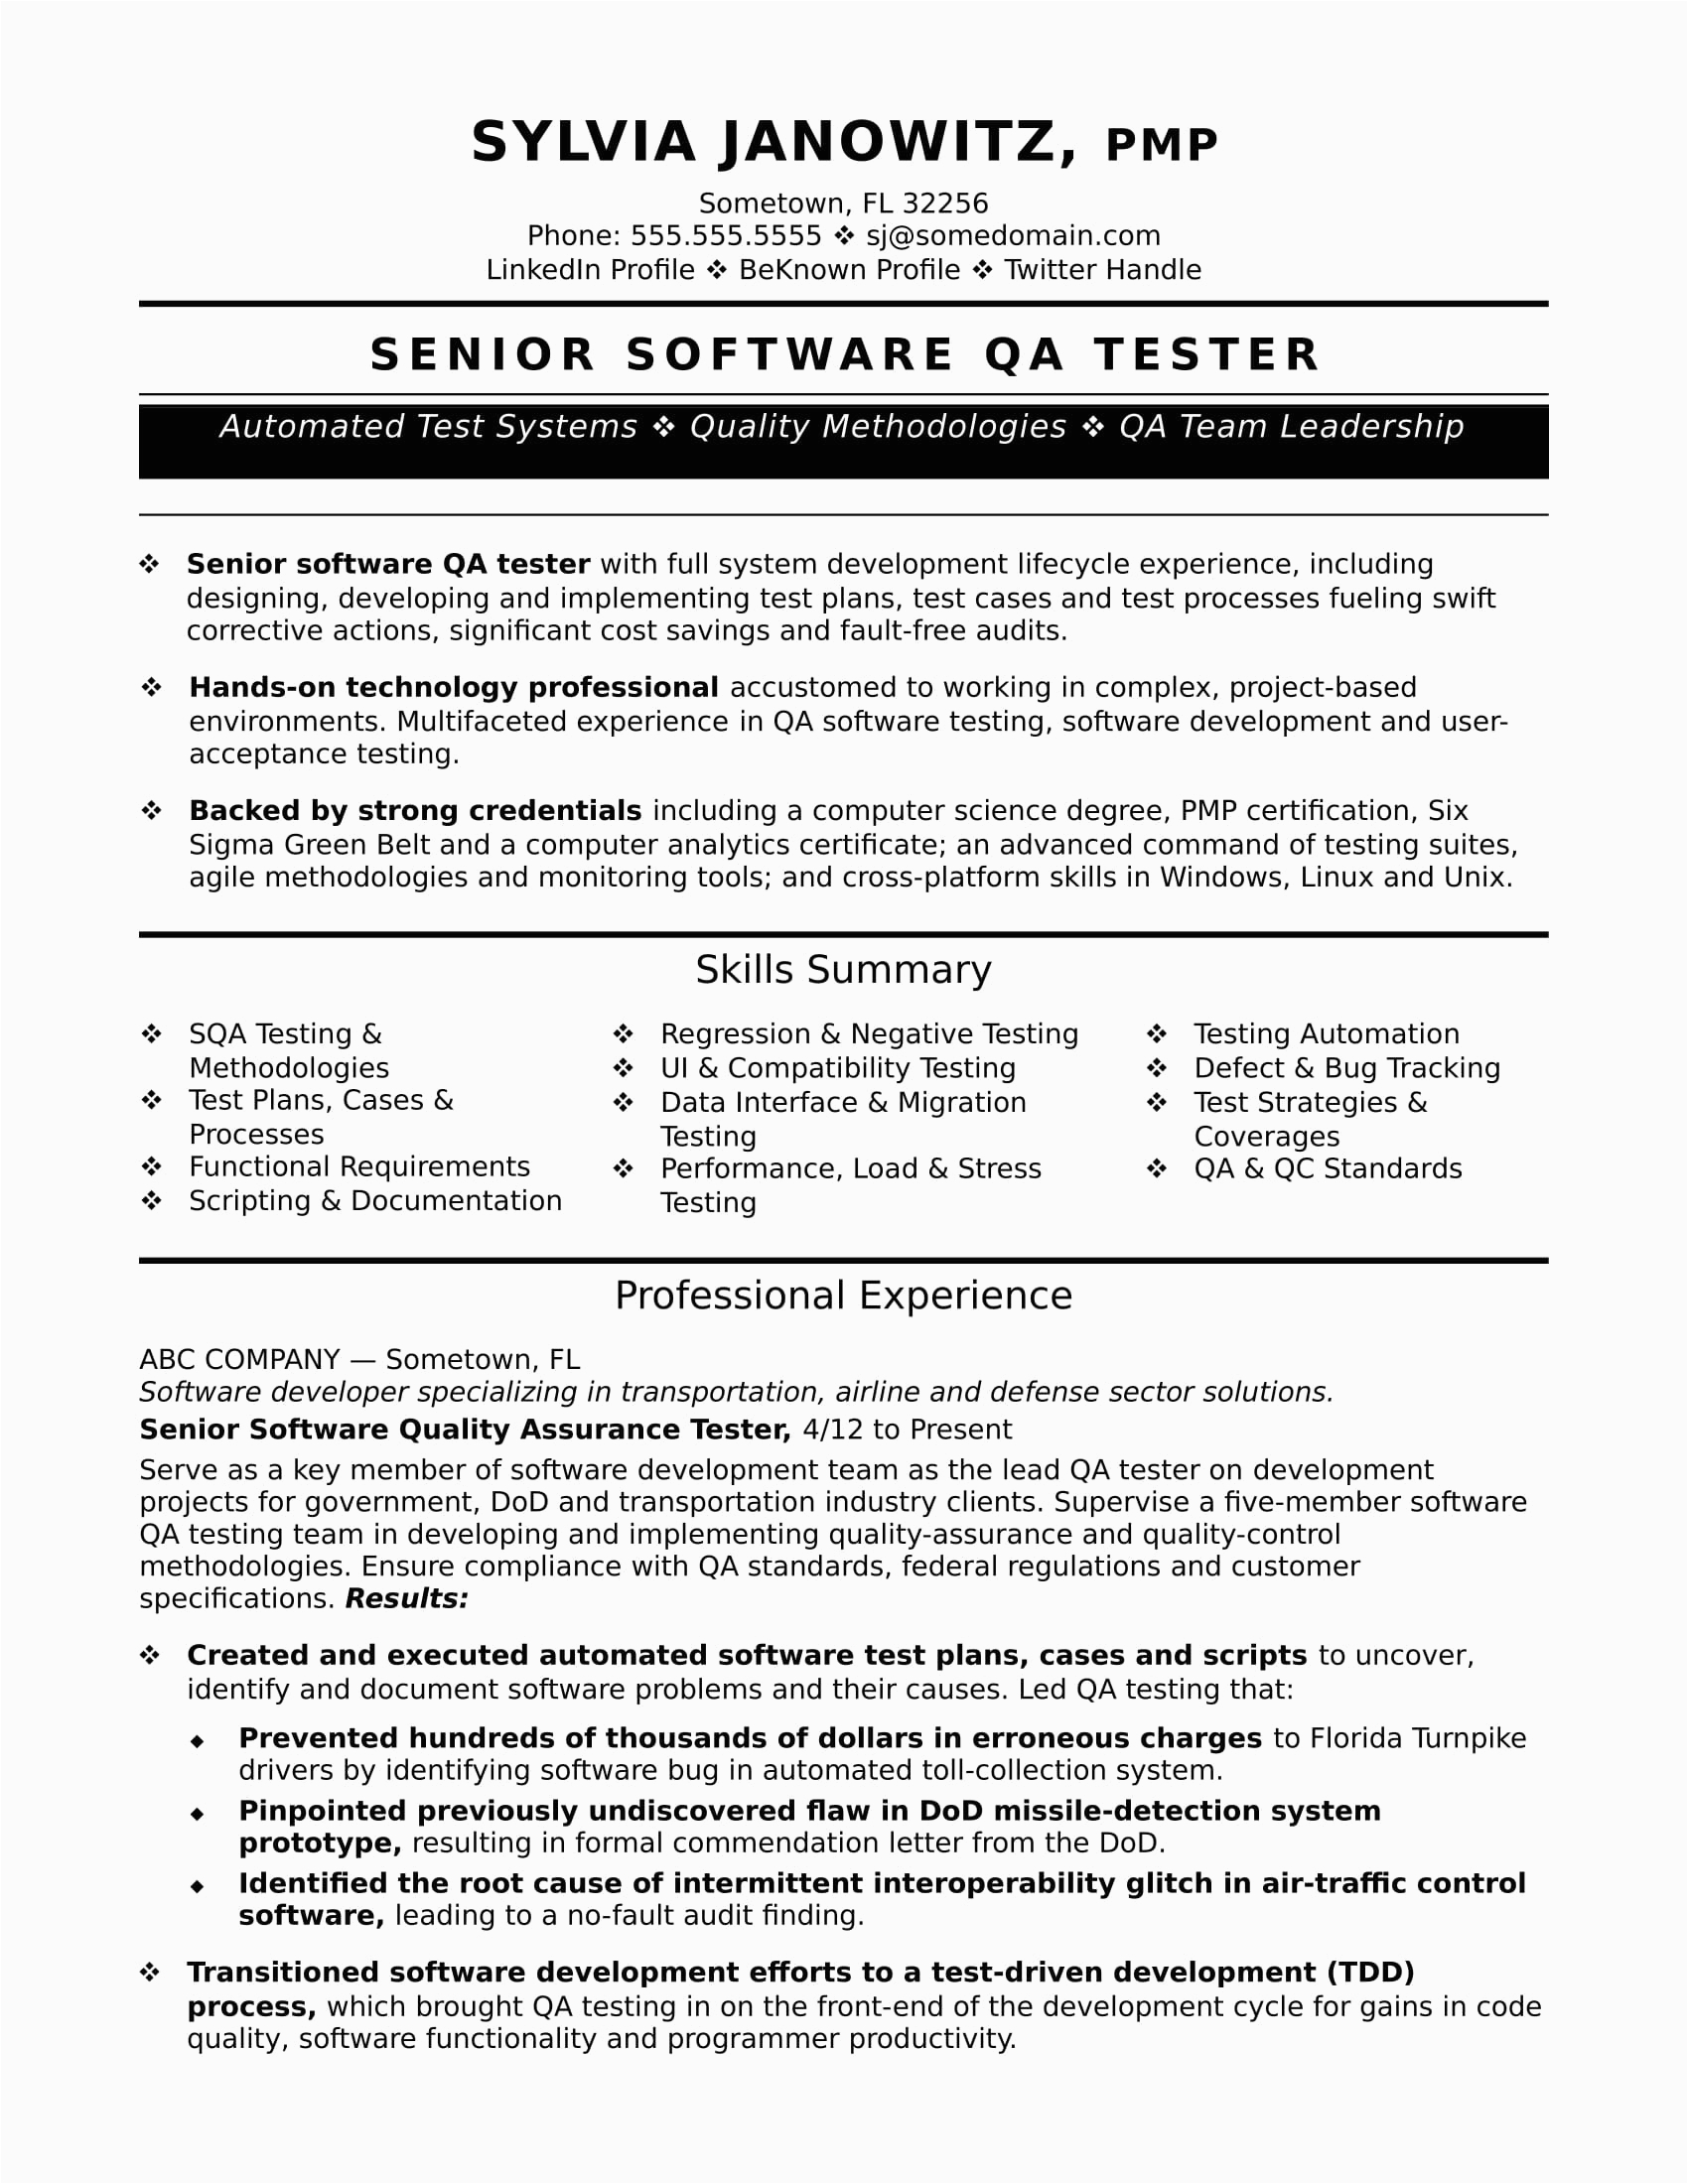 Sample Resumes for Experienced Candidates In Testing Experienced Qa software Tester Resume Sample